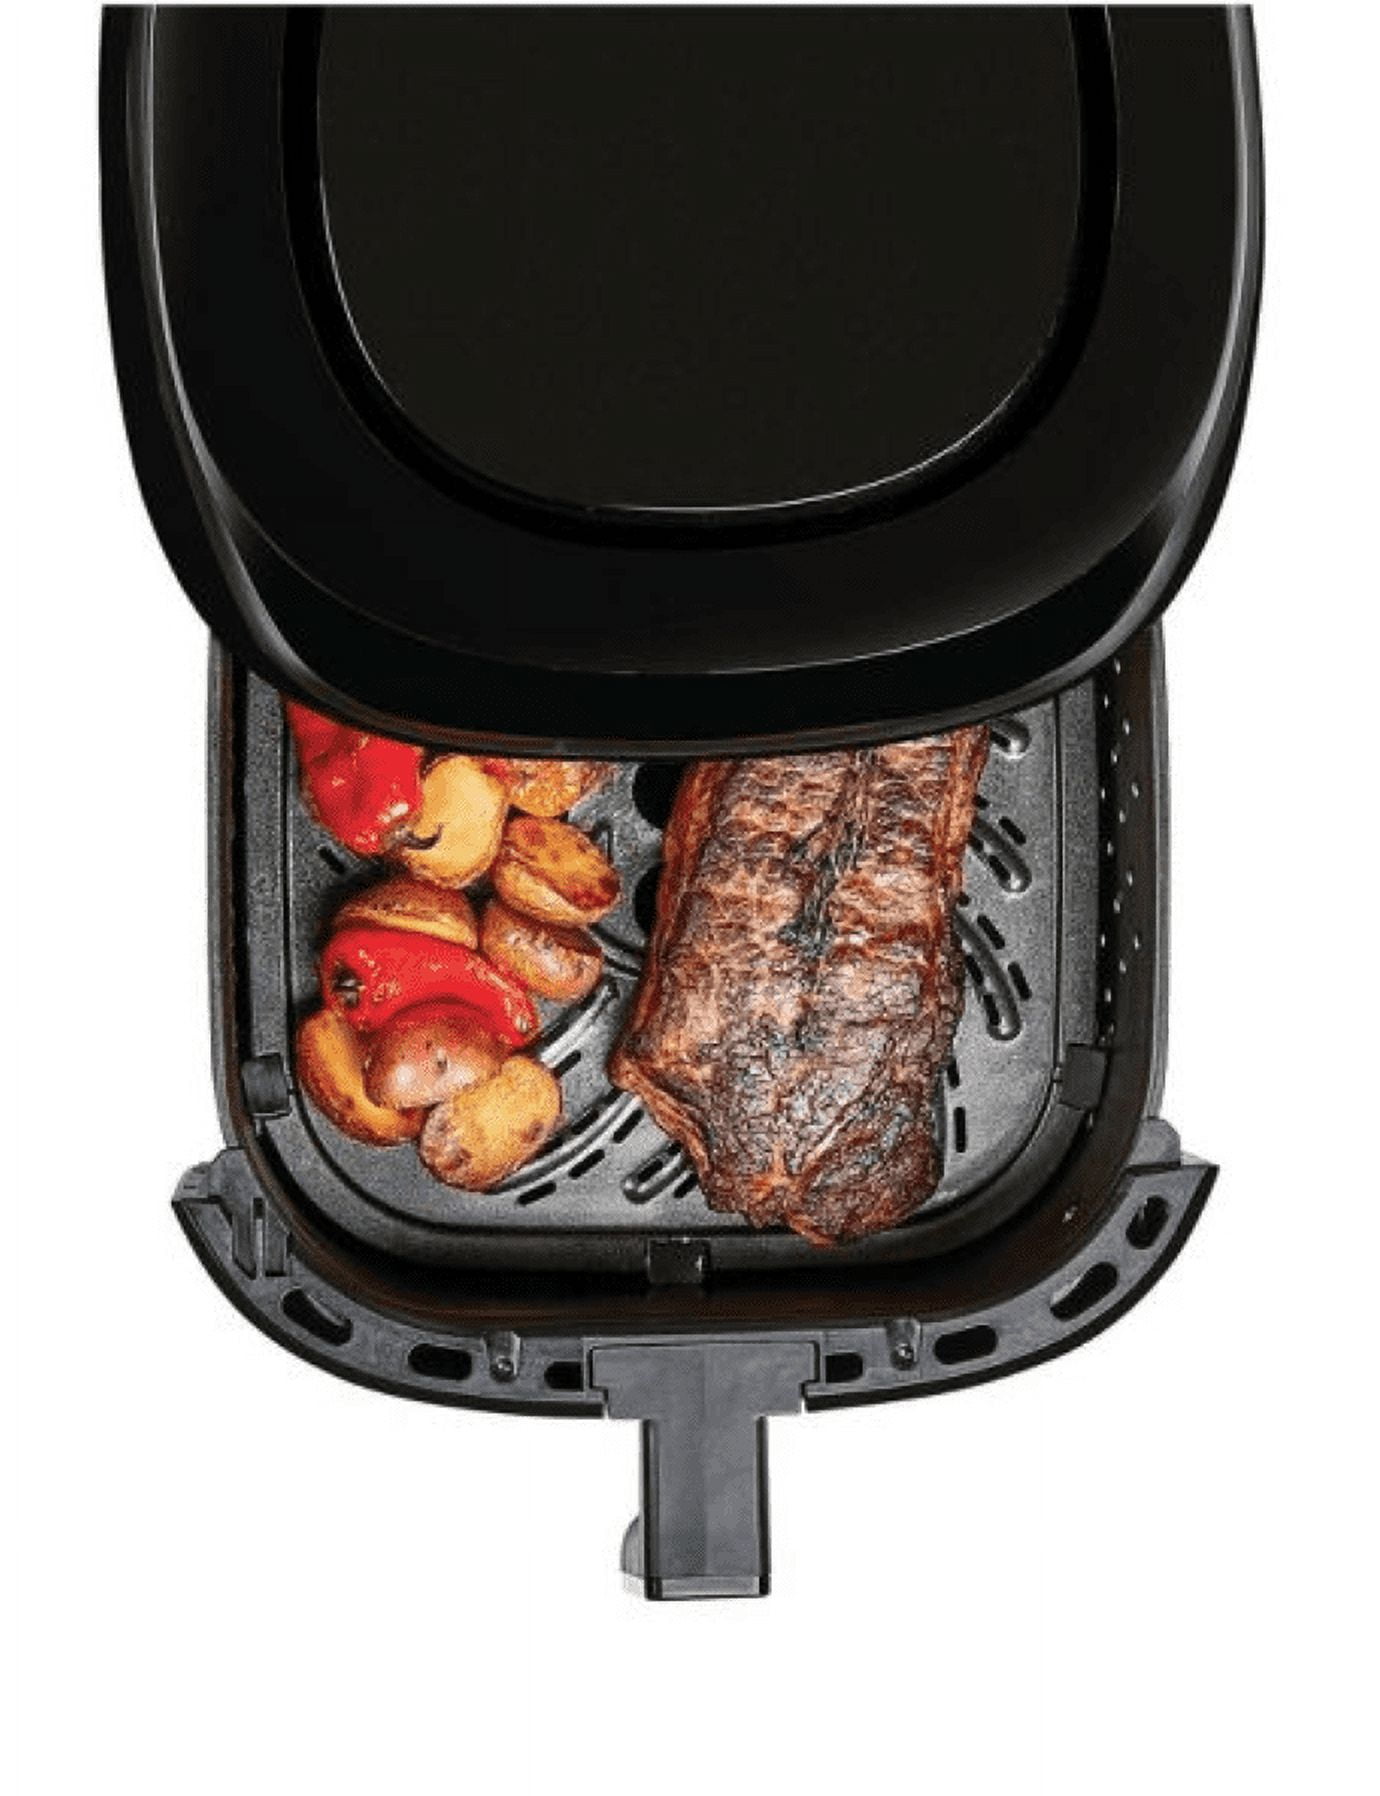 PowerXL Large 8-Quart Nonstick Air Fryer w One-Touch Digital Display BLK  752356833282